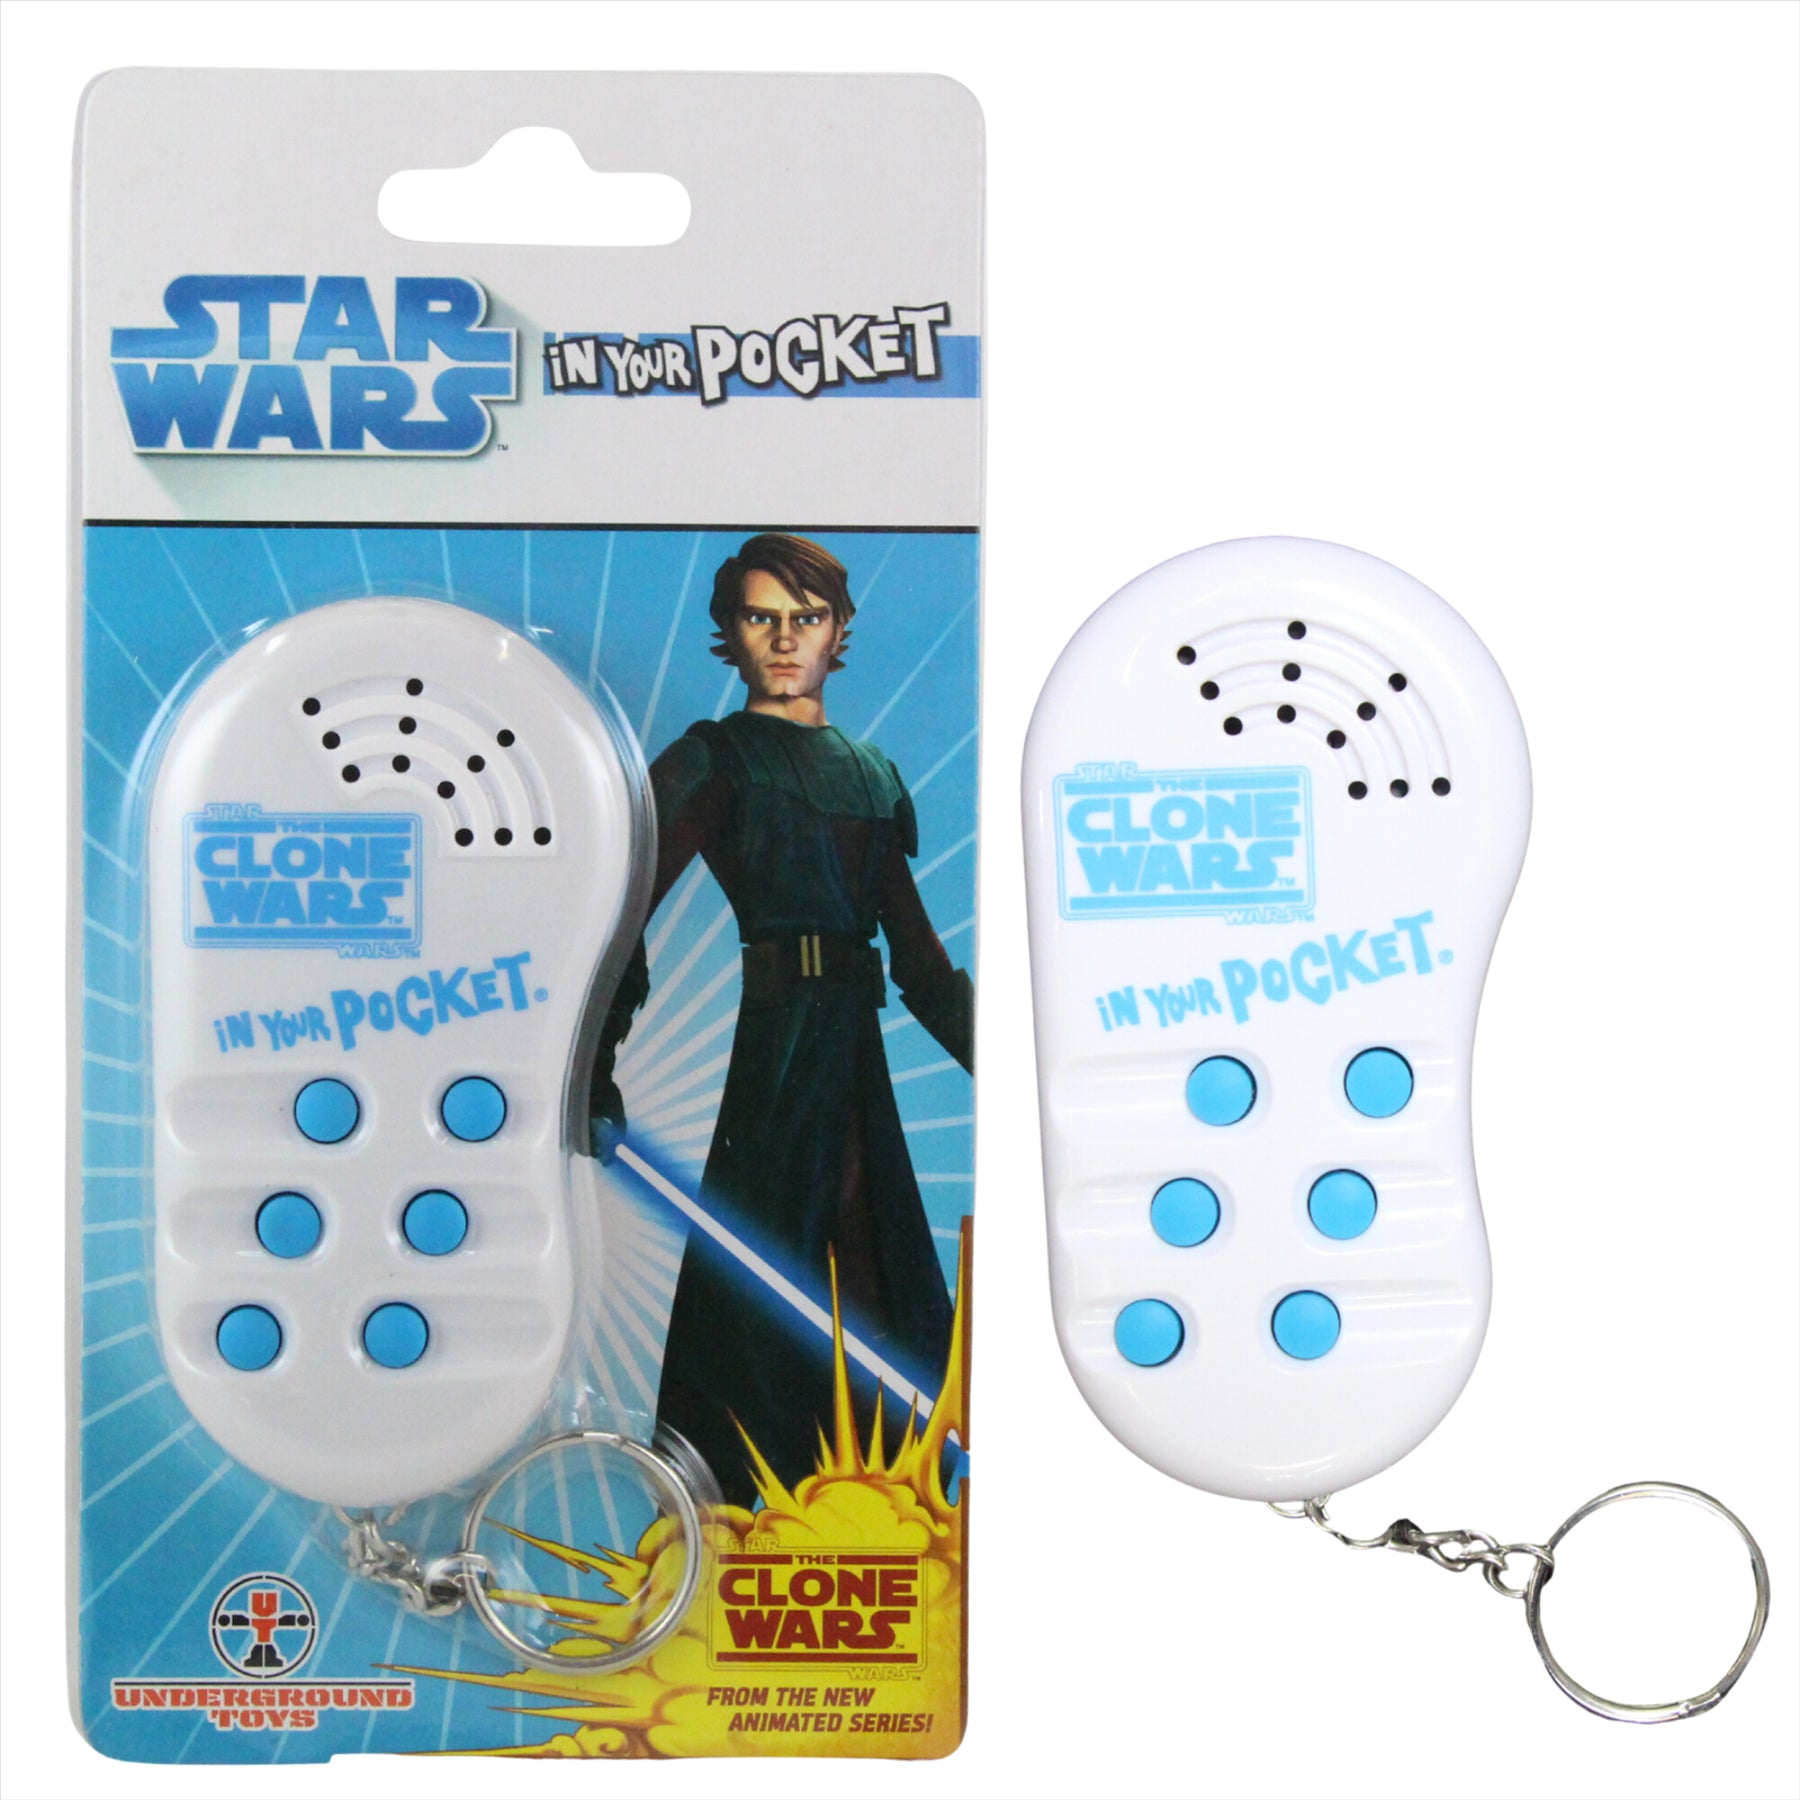 Star-Wars The Child Wall Clock, Clone Wars Voice Keychain and Hot Wheels Character Car Wrecker - Toptoys2u